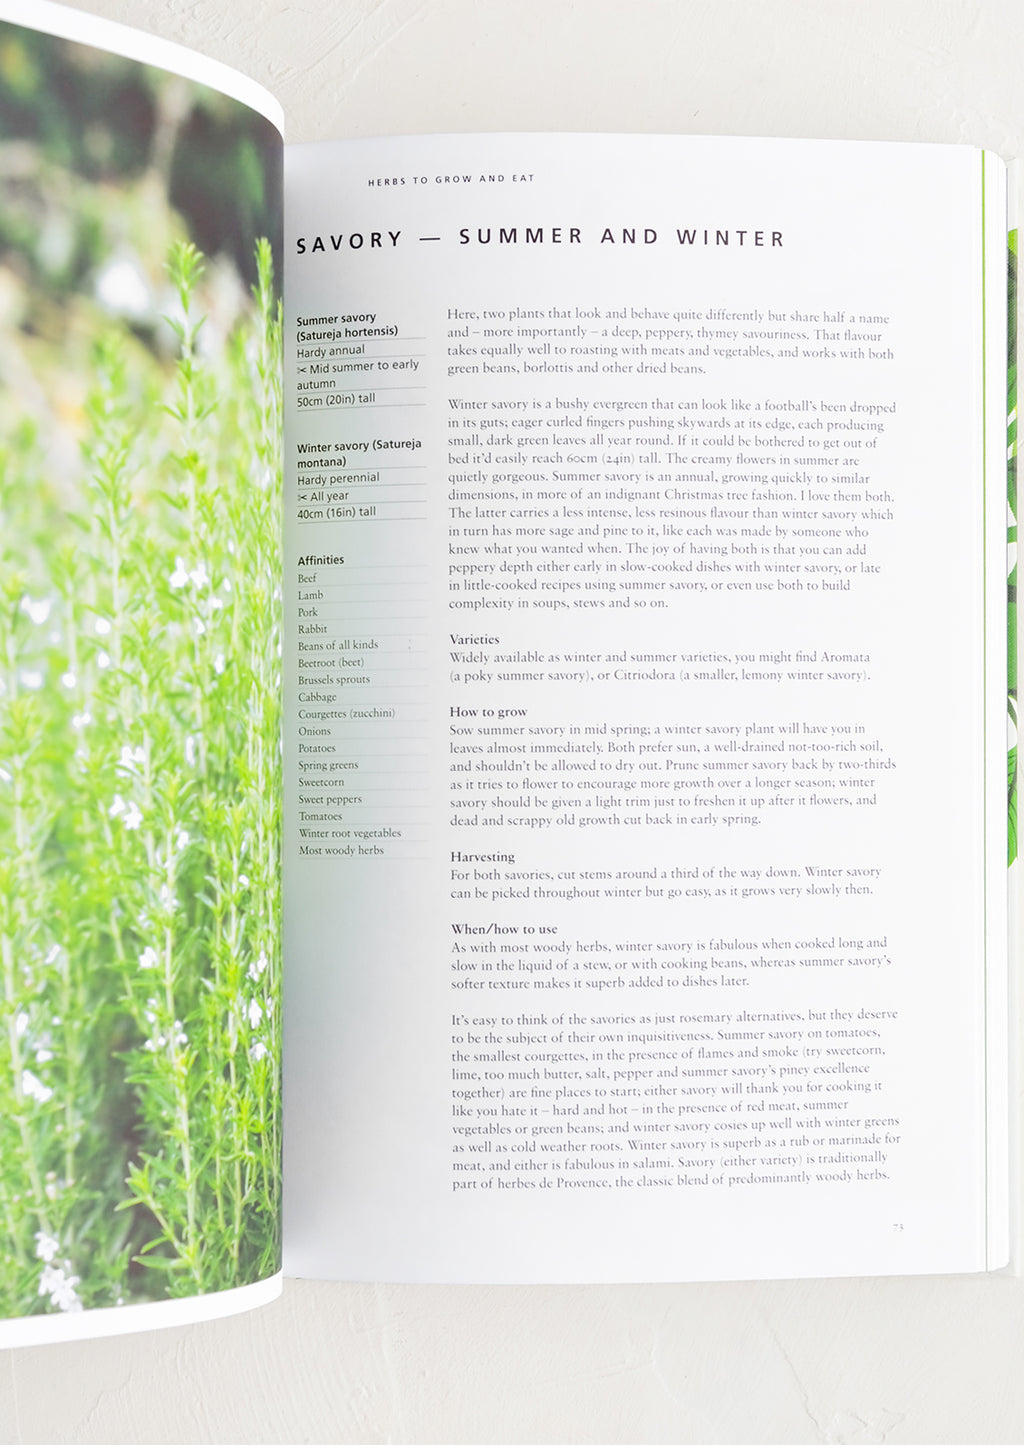 2: A page in a book about summer savory and winter savory.